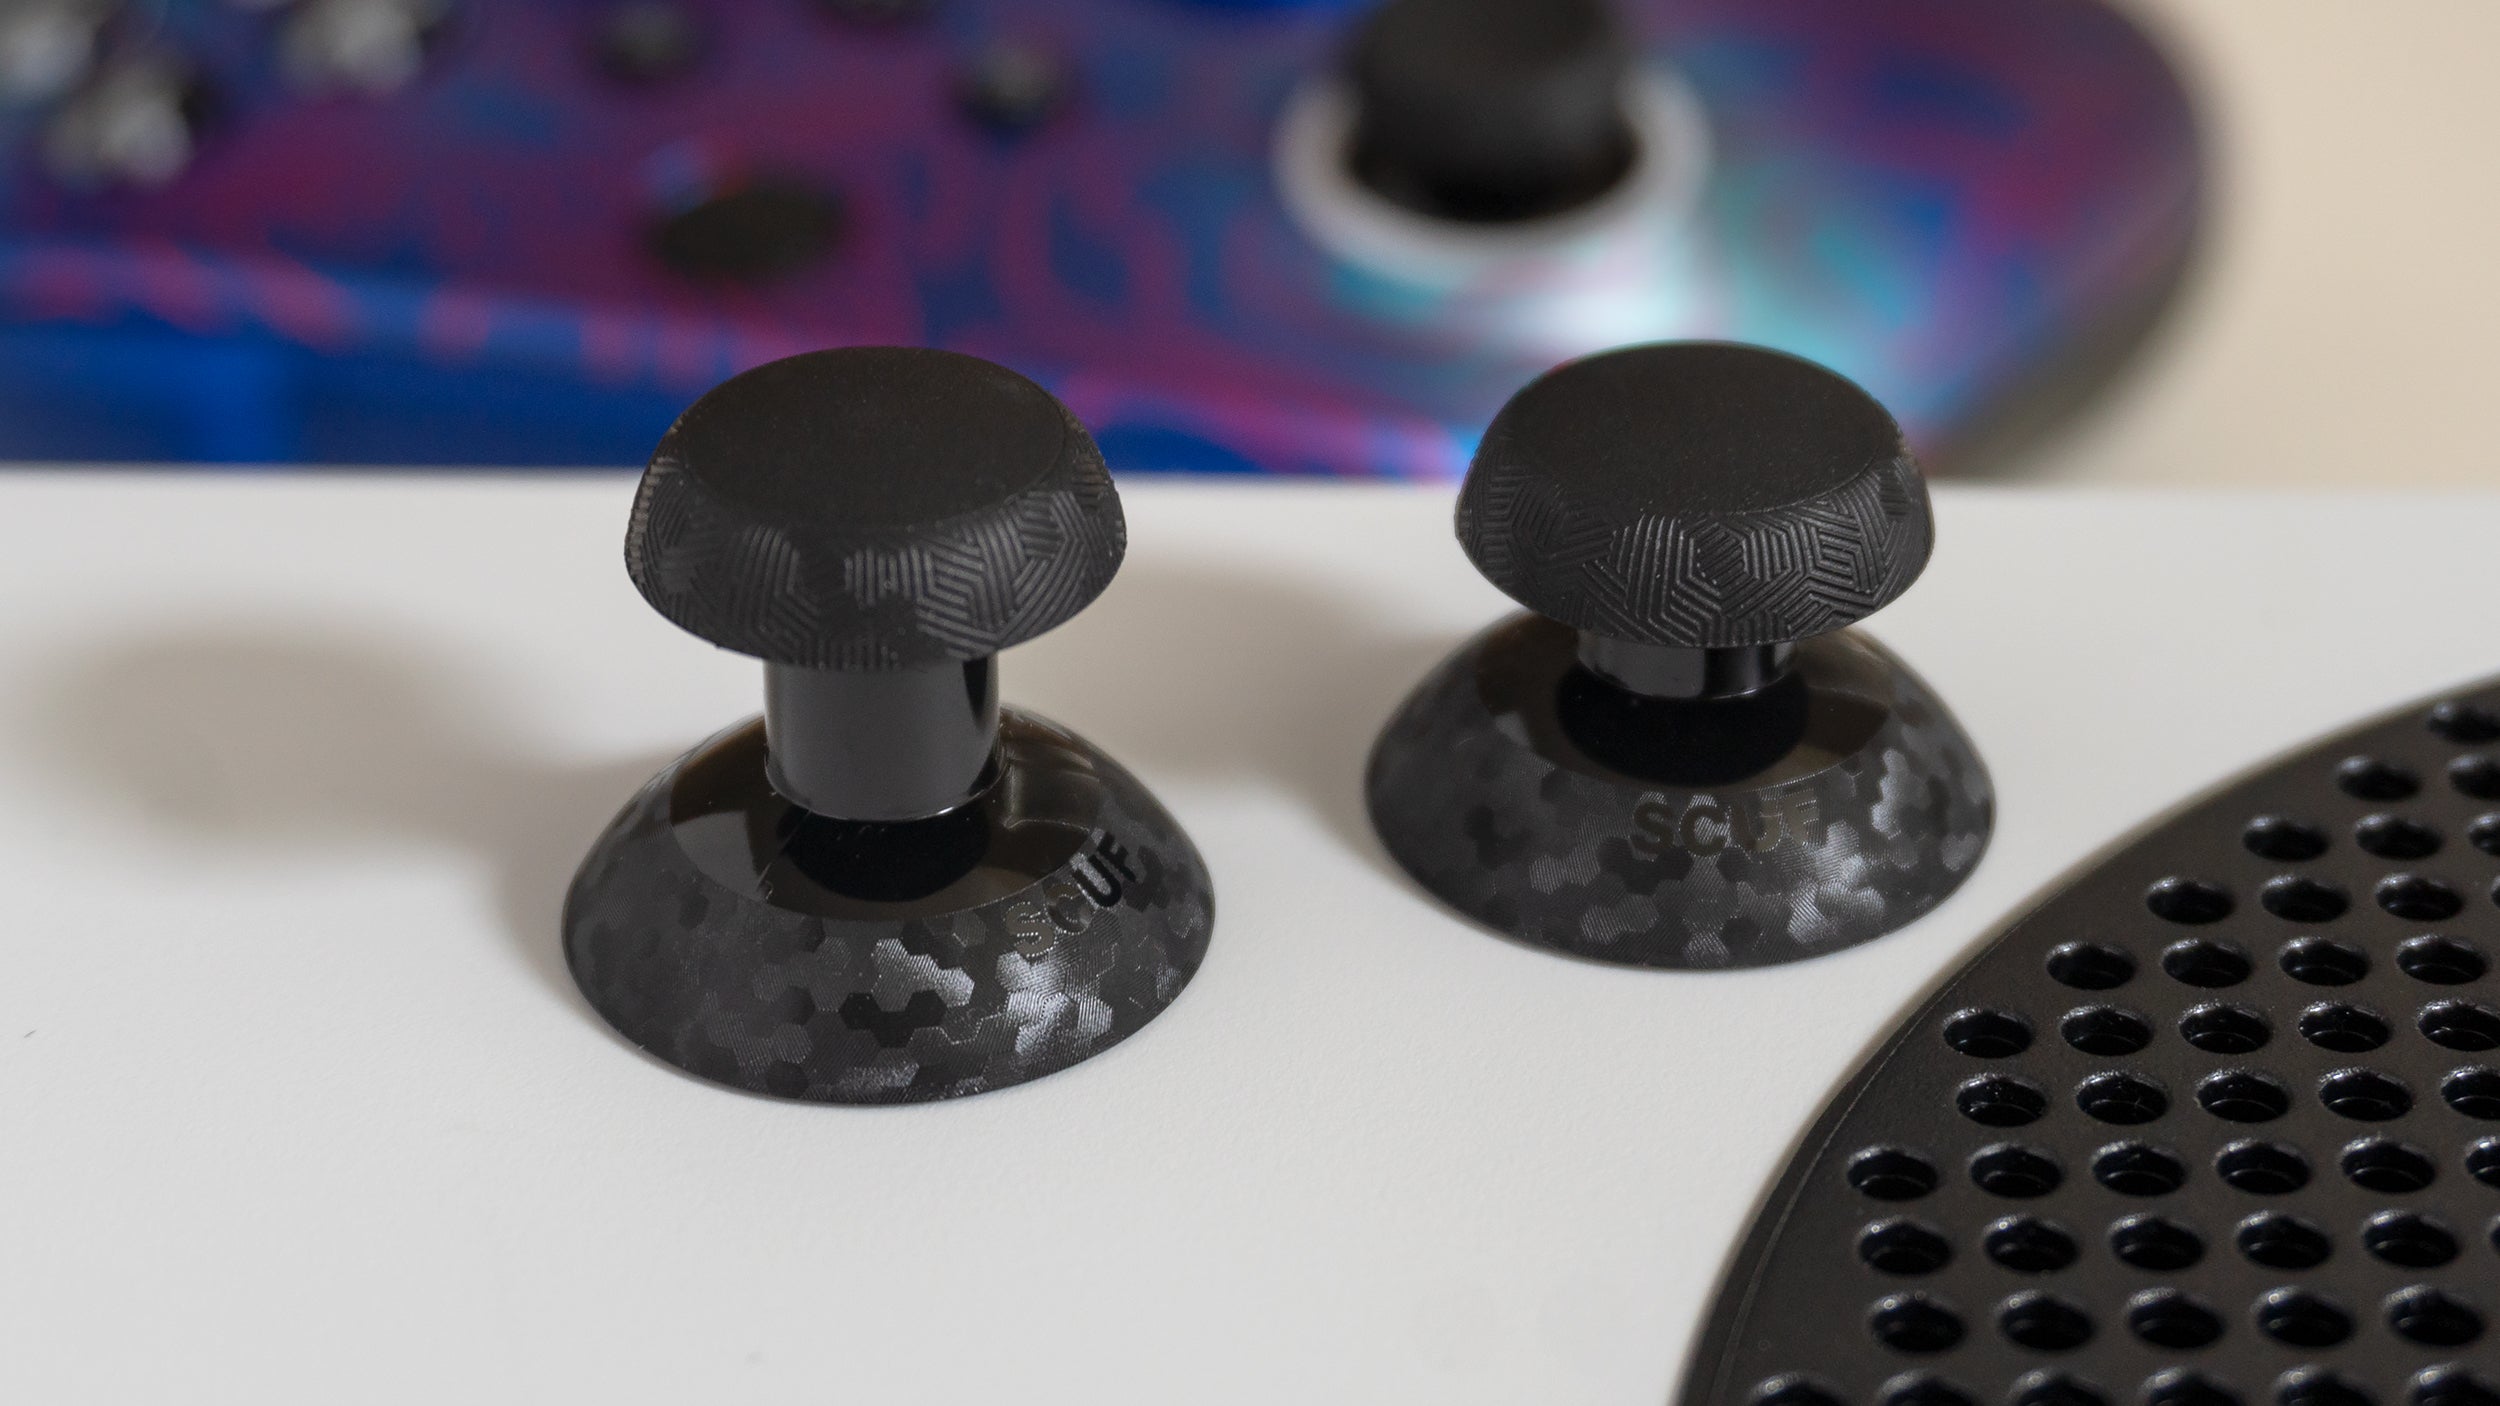 The Scuf Instinct and Instinct Pro come with alternate dome-topped joysticks, one short and one tall so you can test which one might work better for you. (Photo: Andrew Liszewski - Gizmodo)